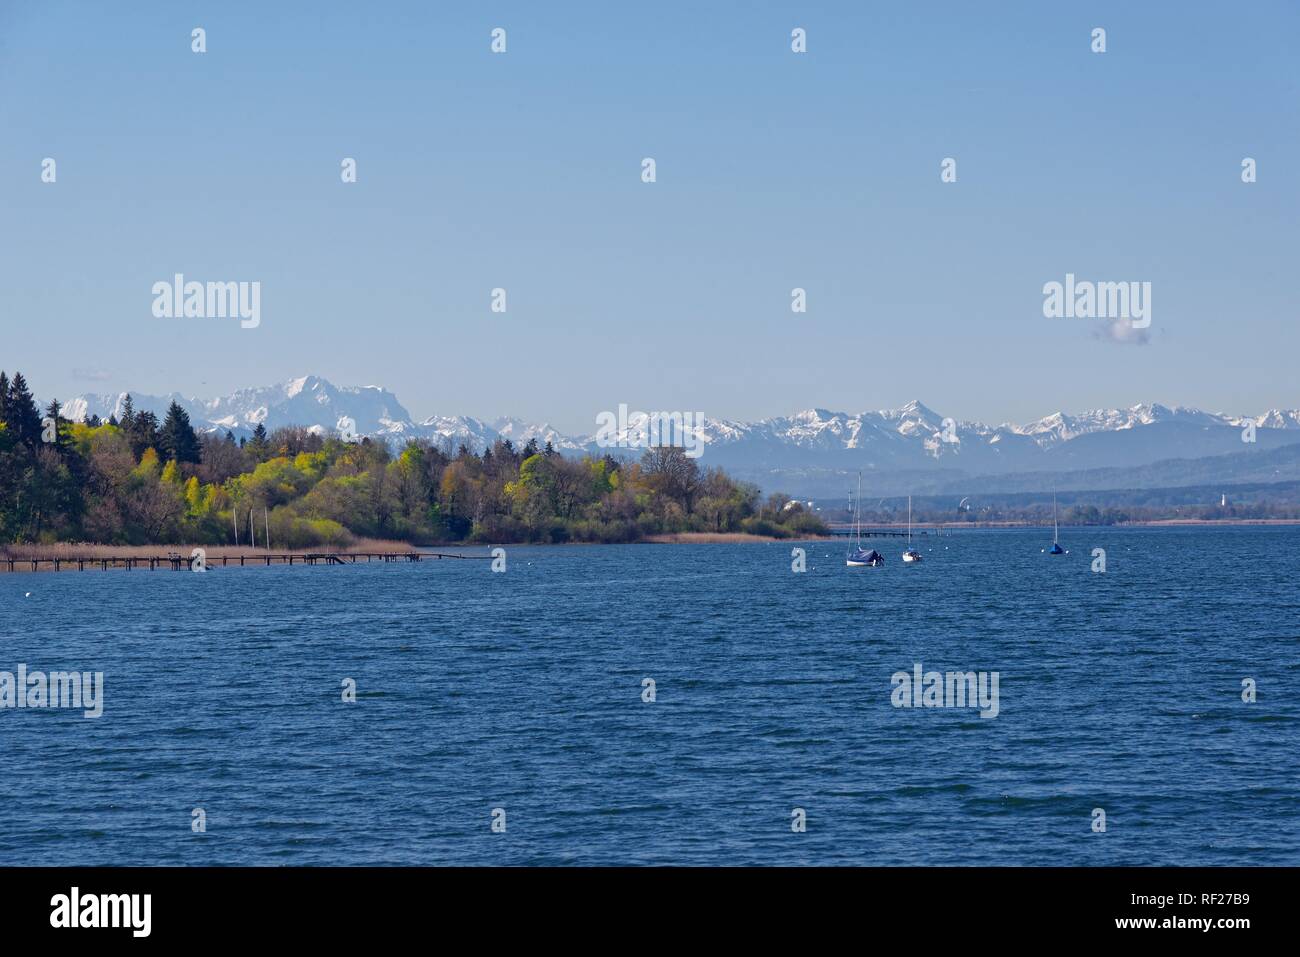 Lake Ammer near Hersching with the snow-covered Zugspitze massif and Alpine peaks, Lake Ammer, Herrsching, Bavaria, Germany Stock Photo